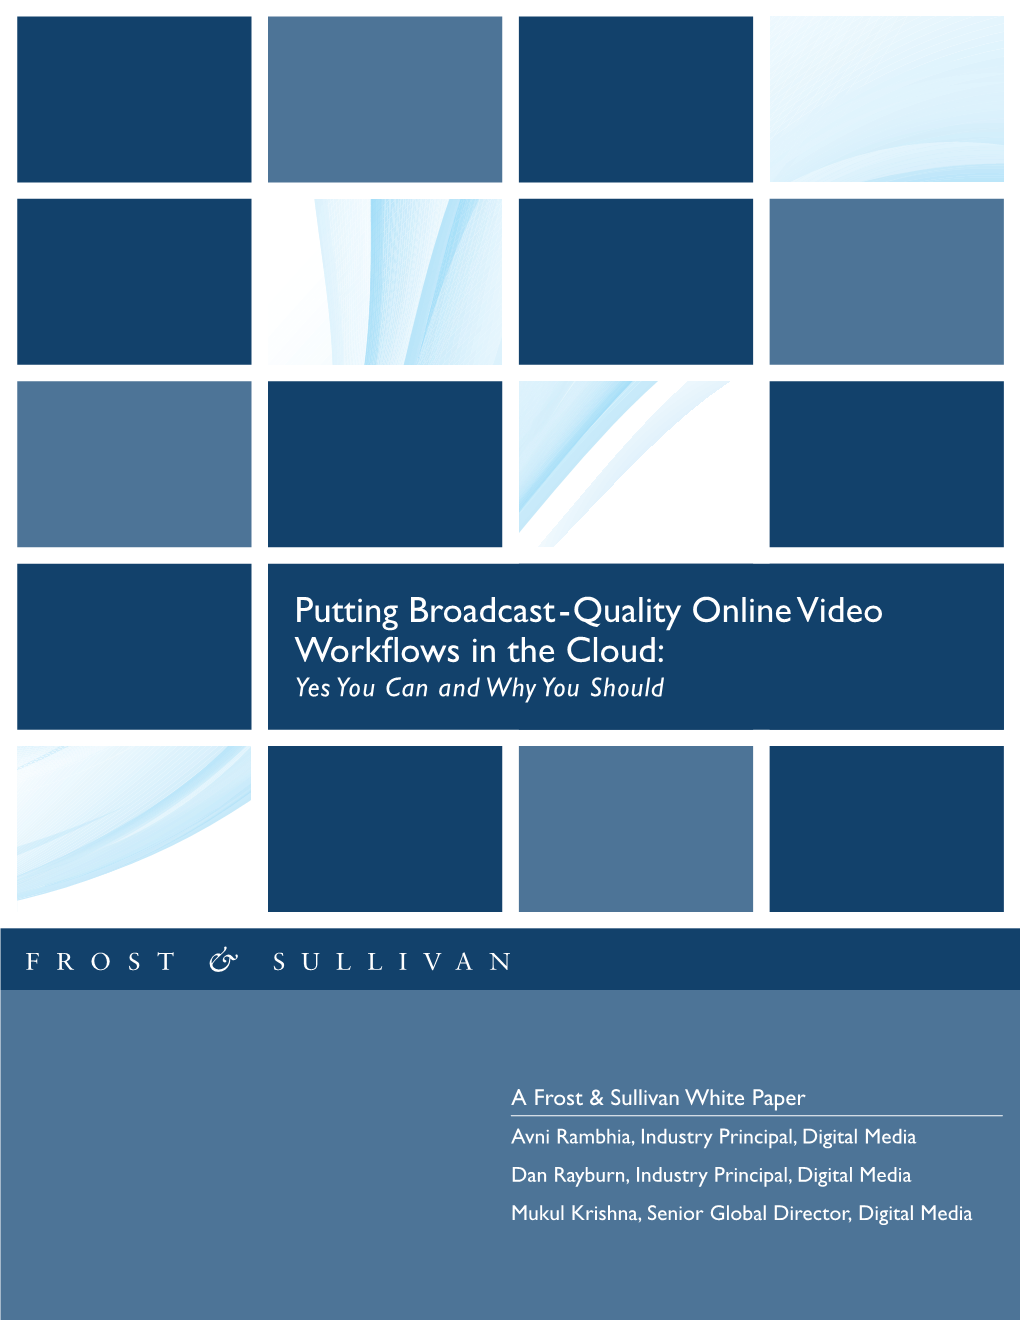 Putting Broadcast-Quality Online Video Workflows in the Cloud: Yes You Can and Why You Should